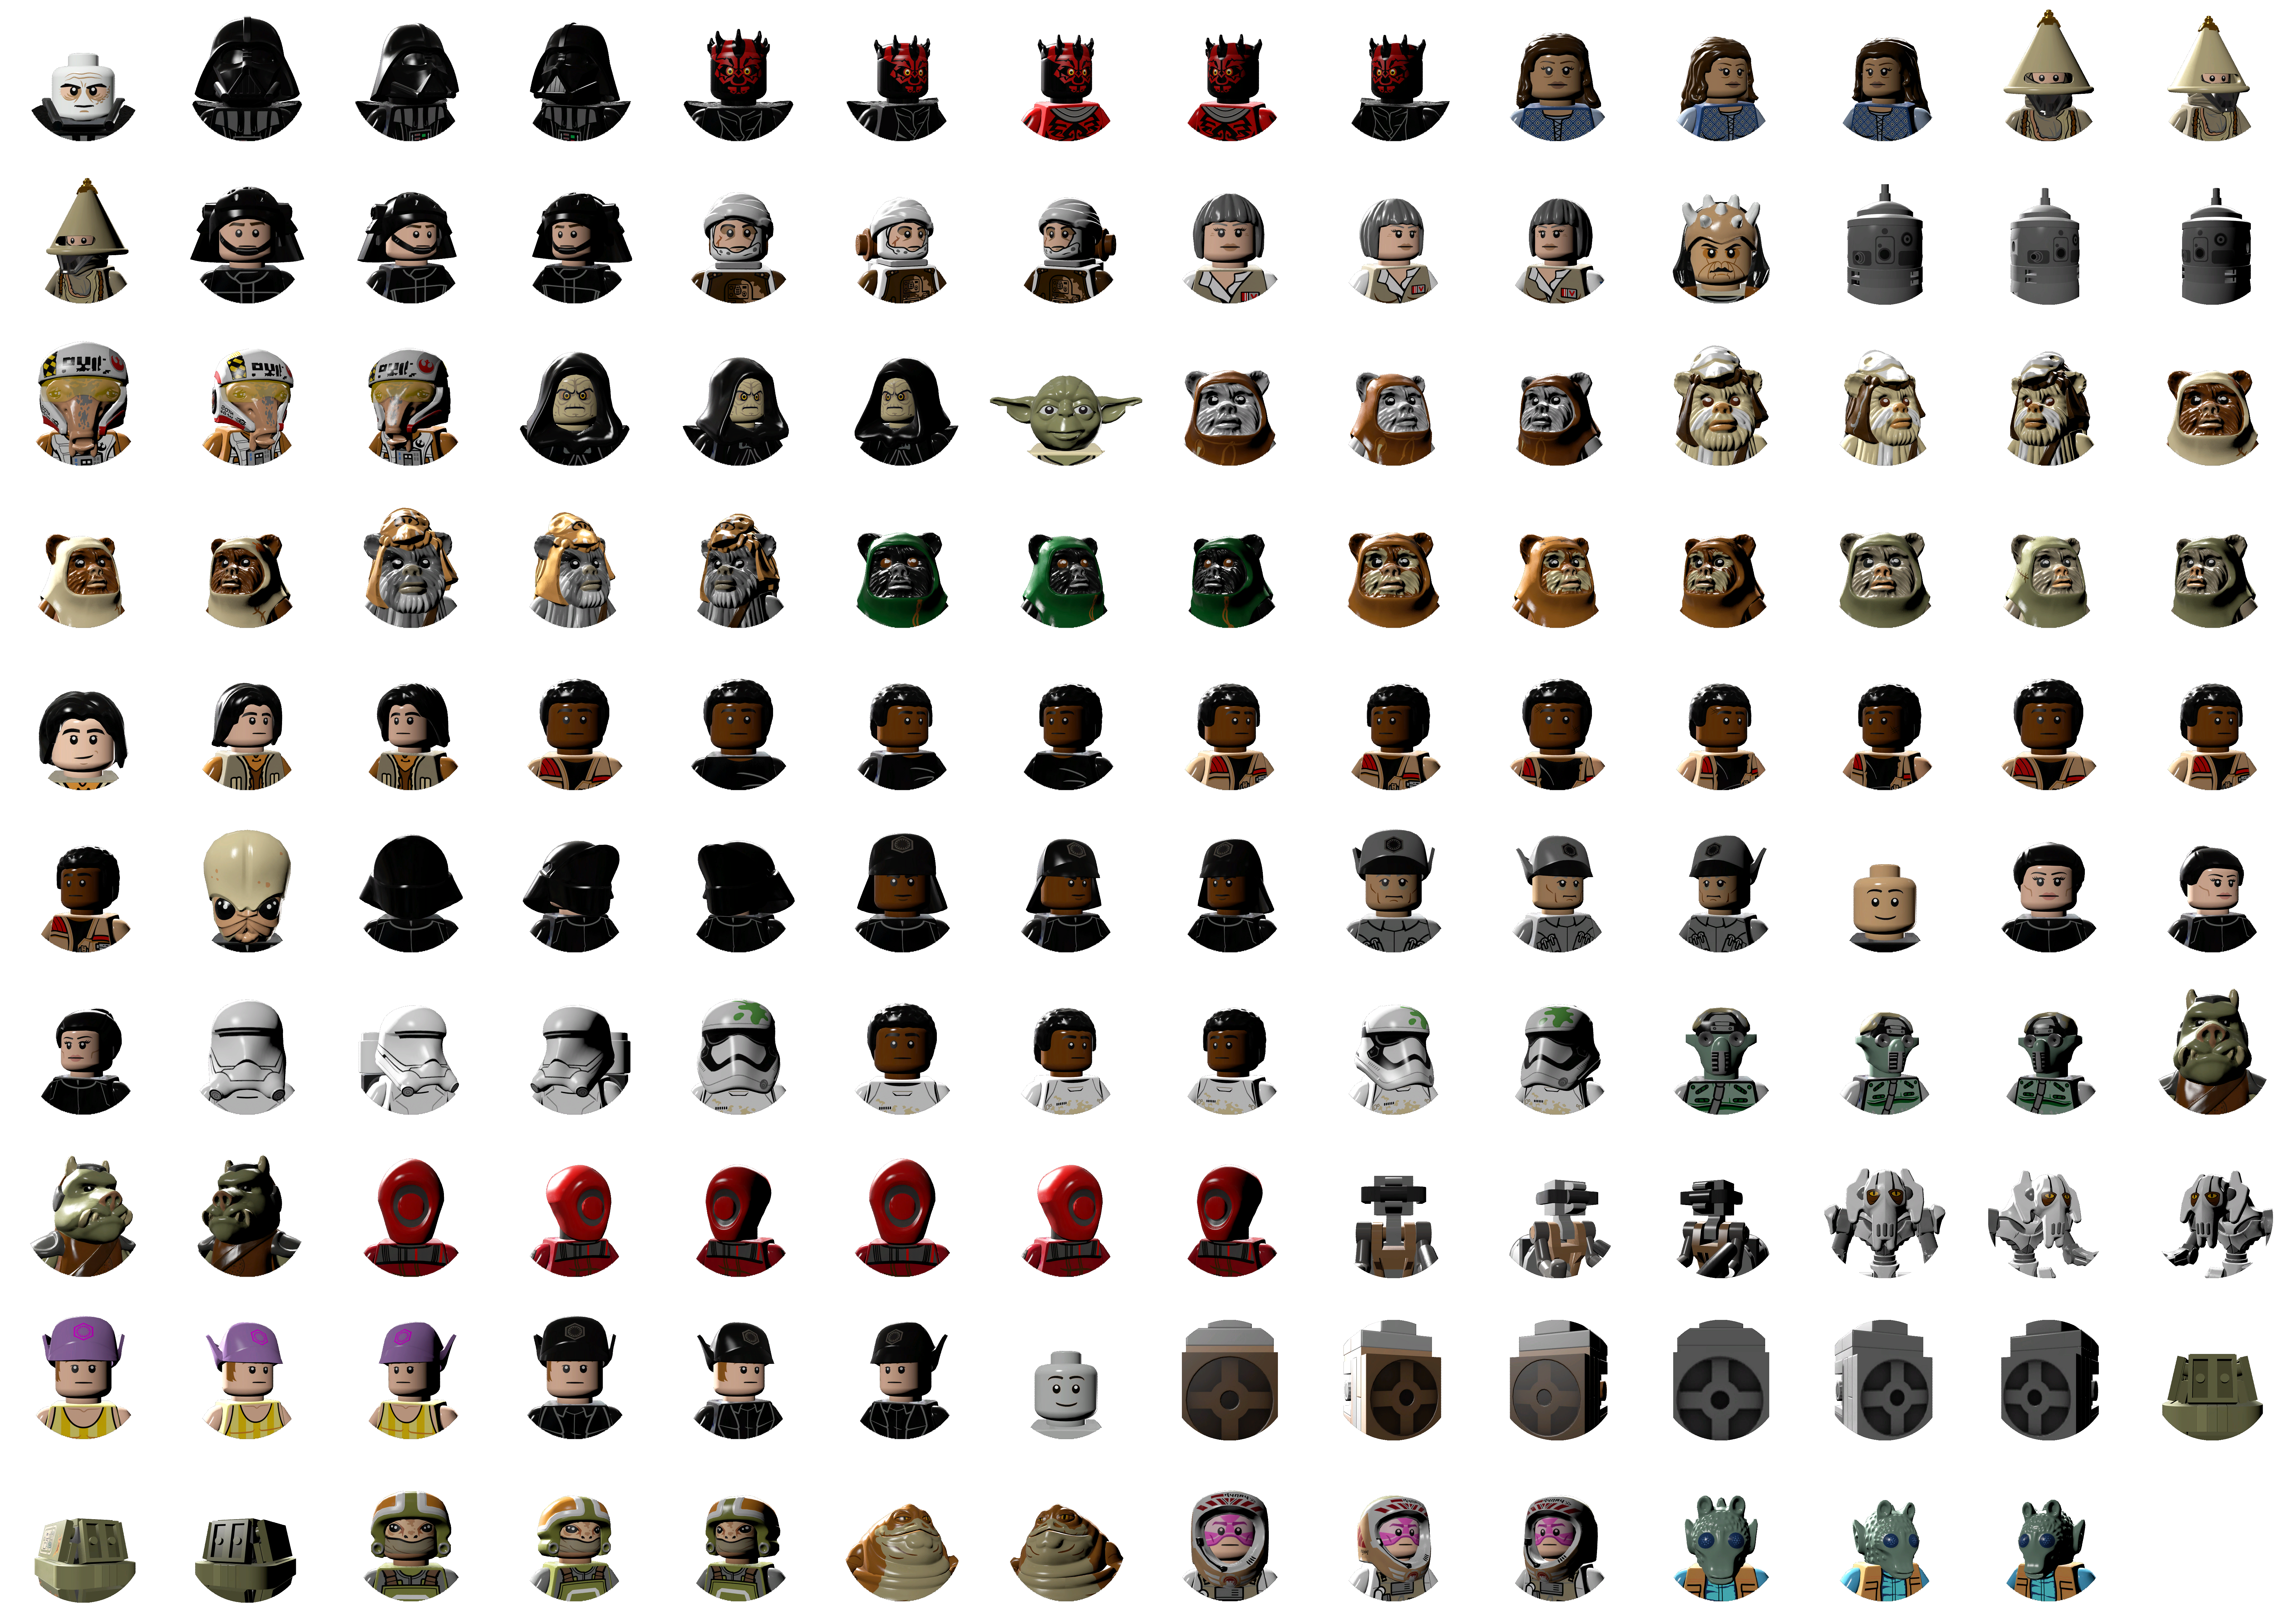 LEGO Star Wars: The Force Awakens - Character Icons (D-G)